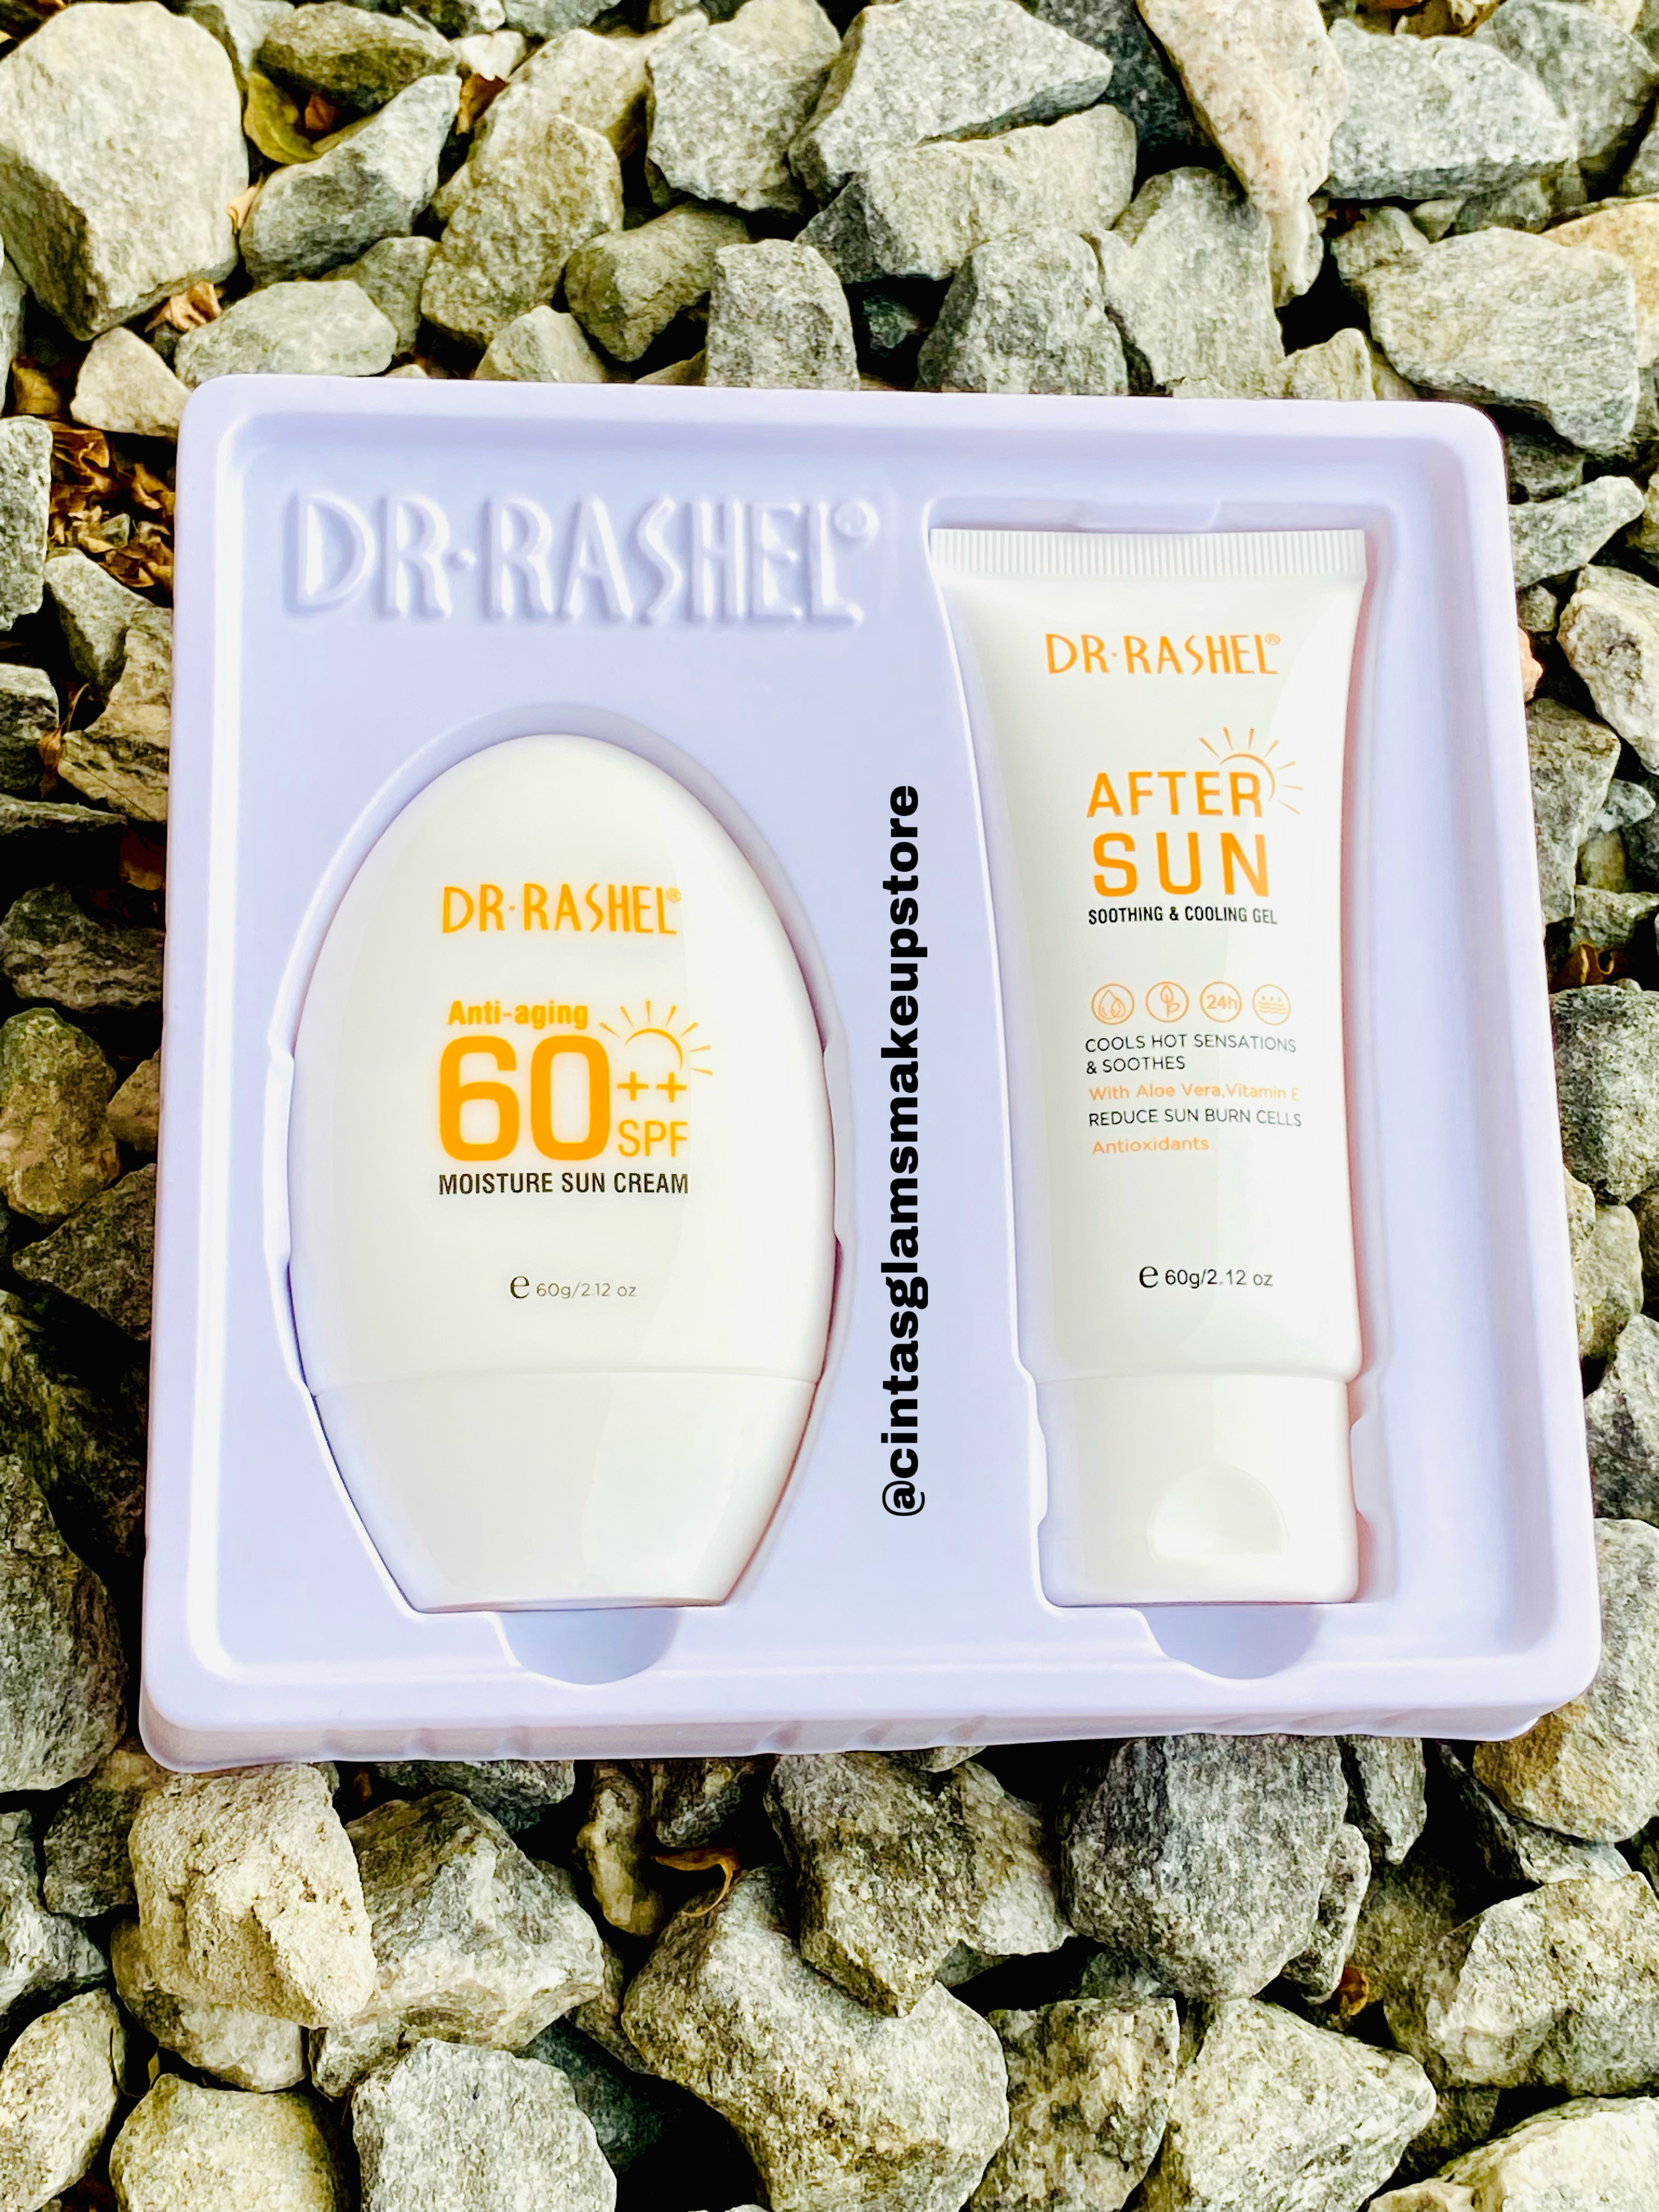 Dr Rashel 2 in 1 Anti-aging 60++ SPF with After Sun Soothing and Cooling Gel